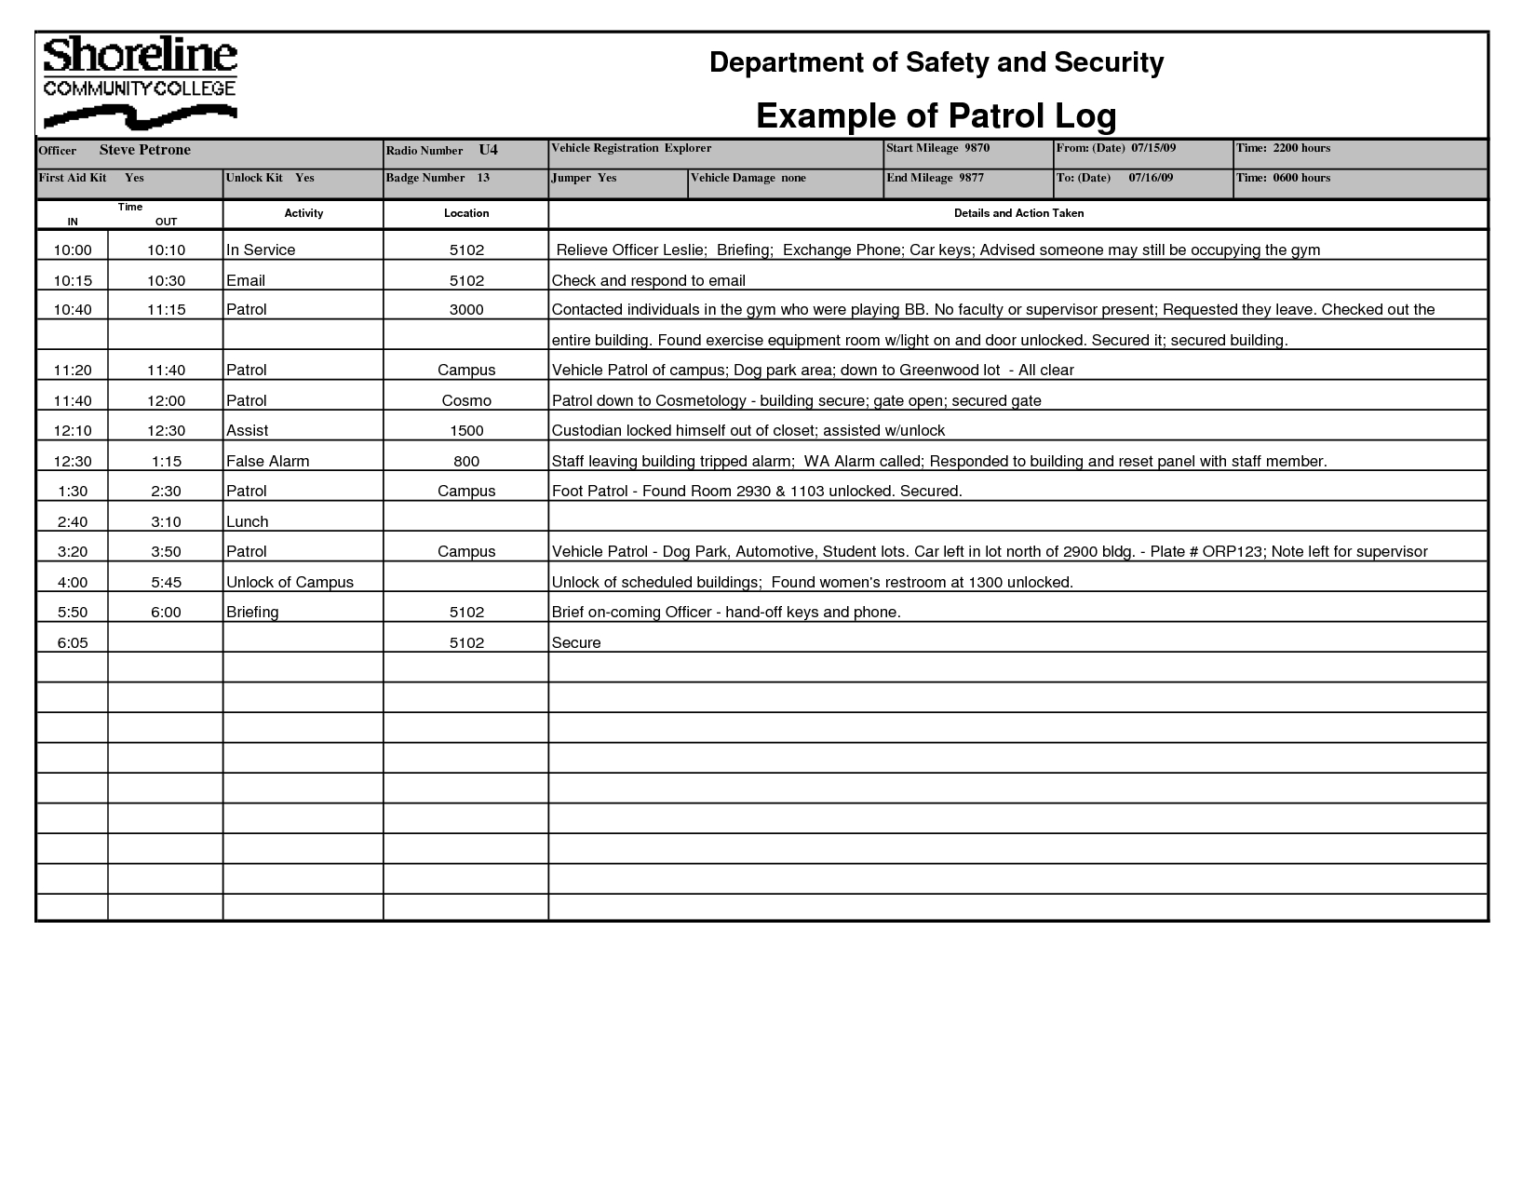 Security Officer Daily Log Template Example Patrol Log Pertaining To